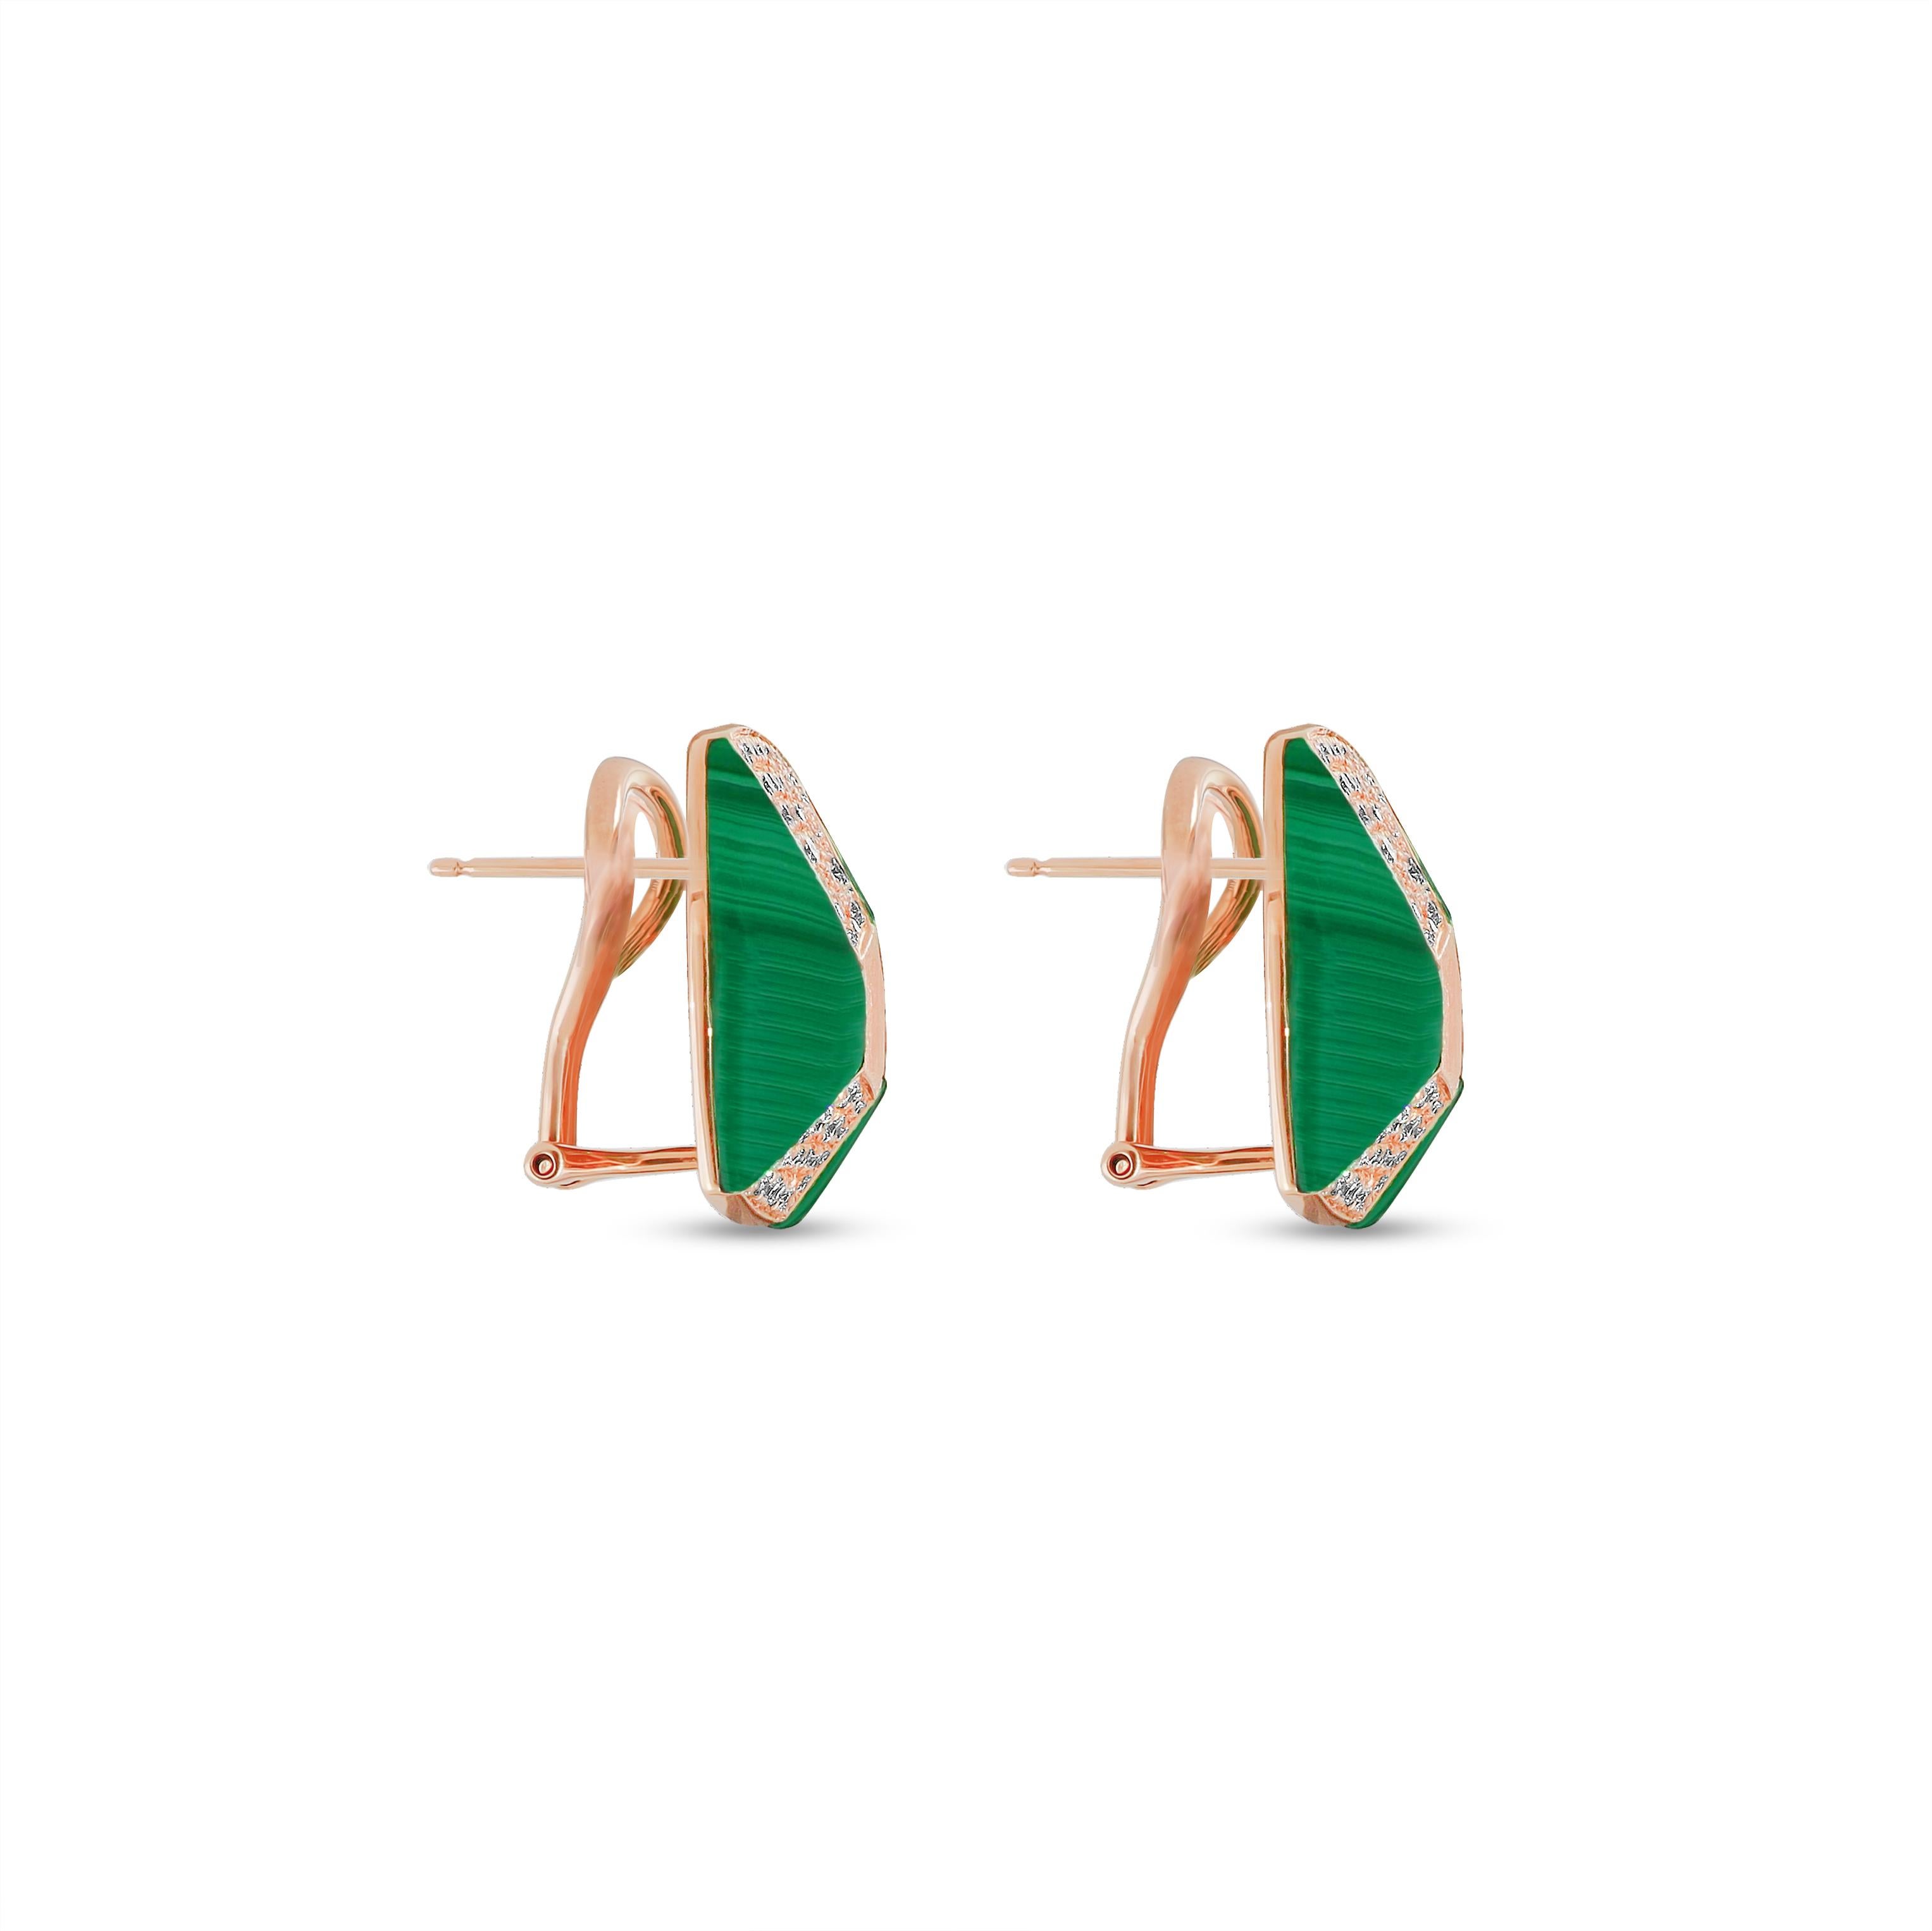 These stunning earrings are sculpted using 18k yellow gold and designed with diamonds and malachite motifs.

-	Weight: 11.468 g 
-	Diamond: 1.48 cts
-	Others: 7.460 
-	Color & clarity: G.H / SI
